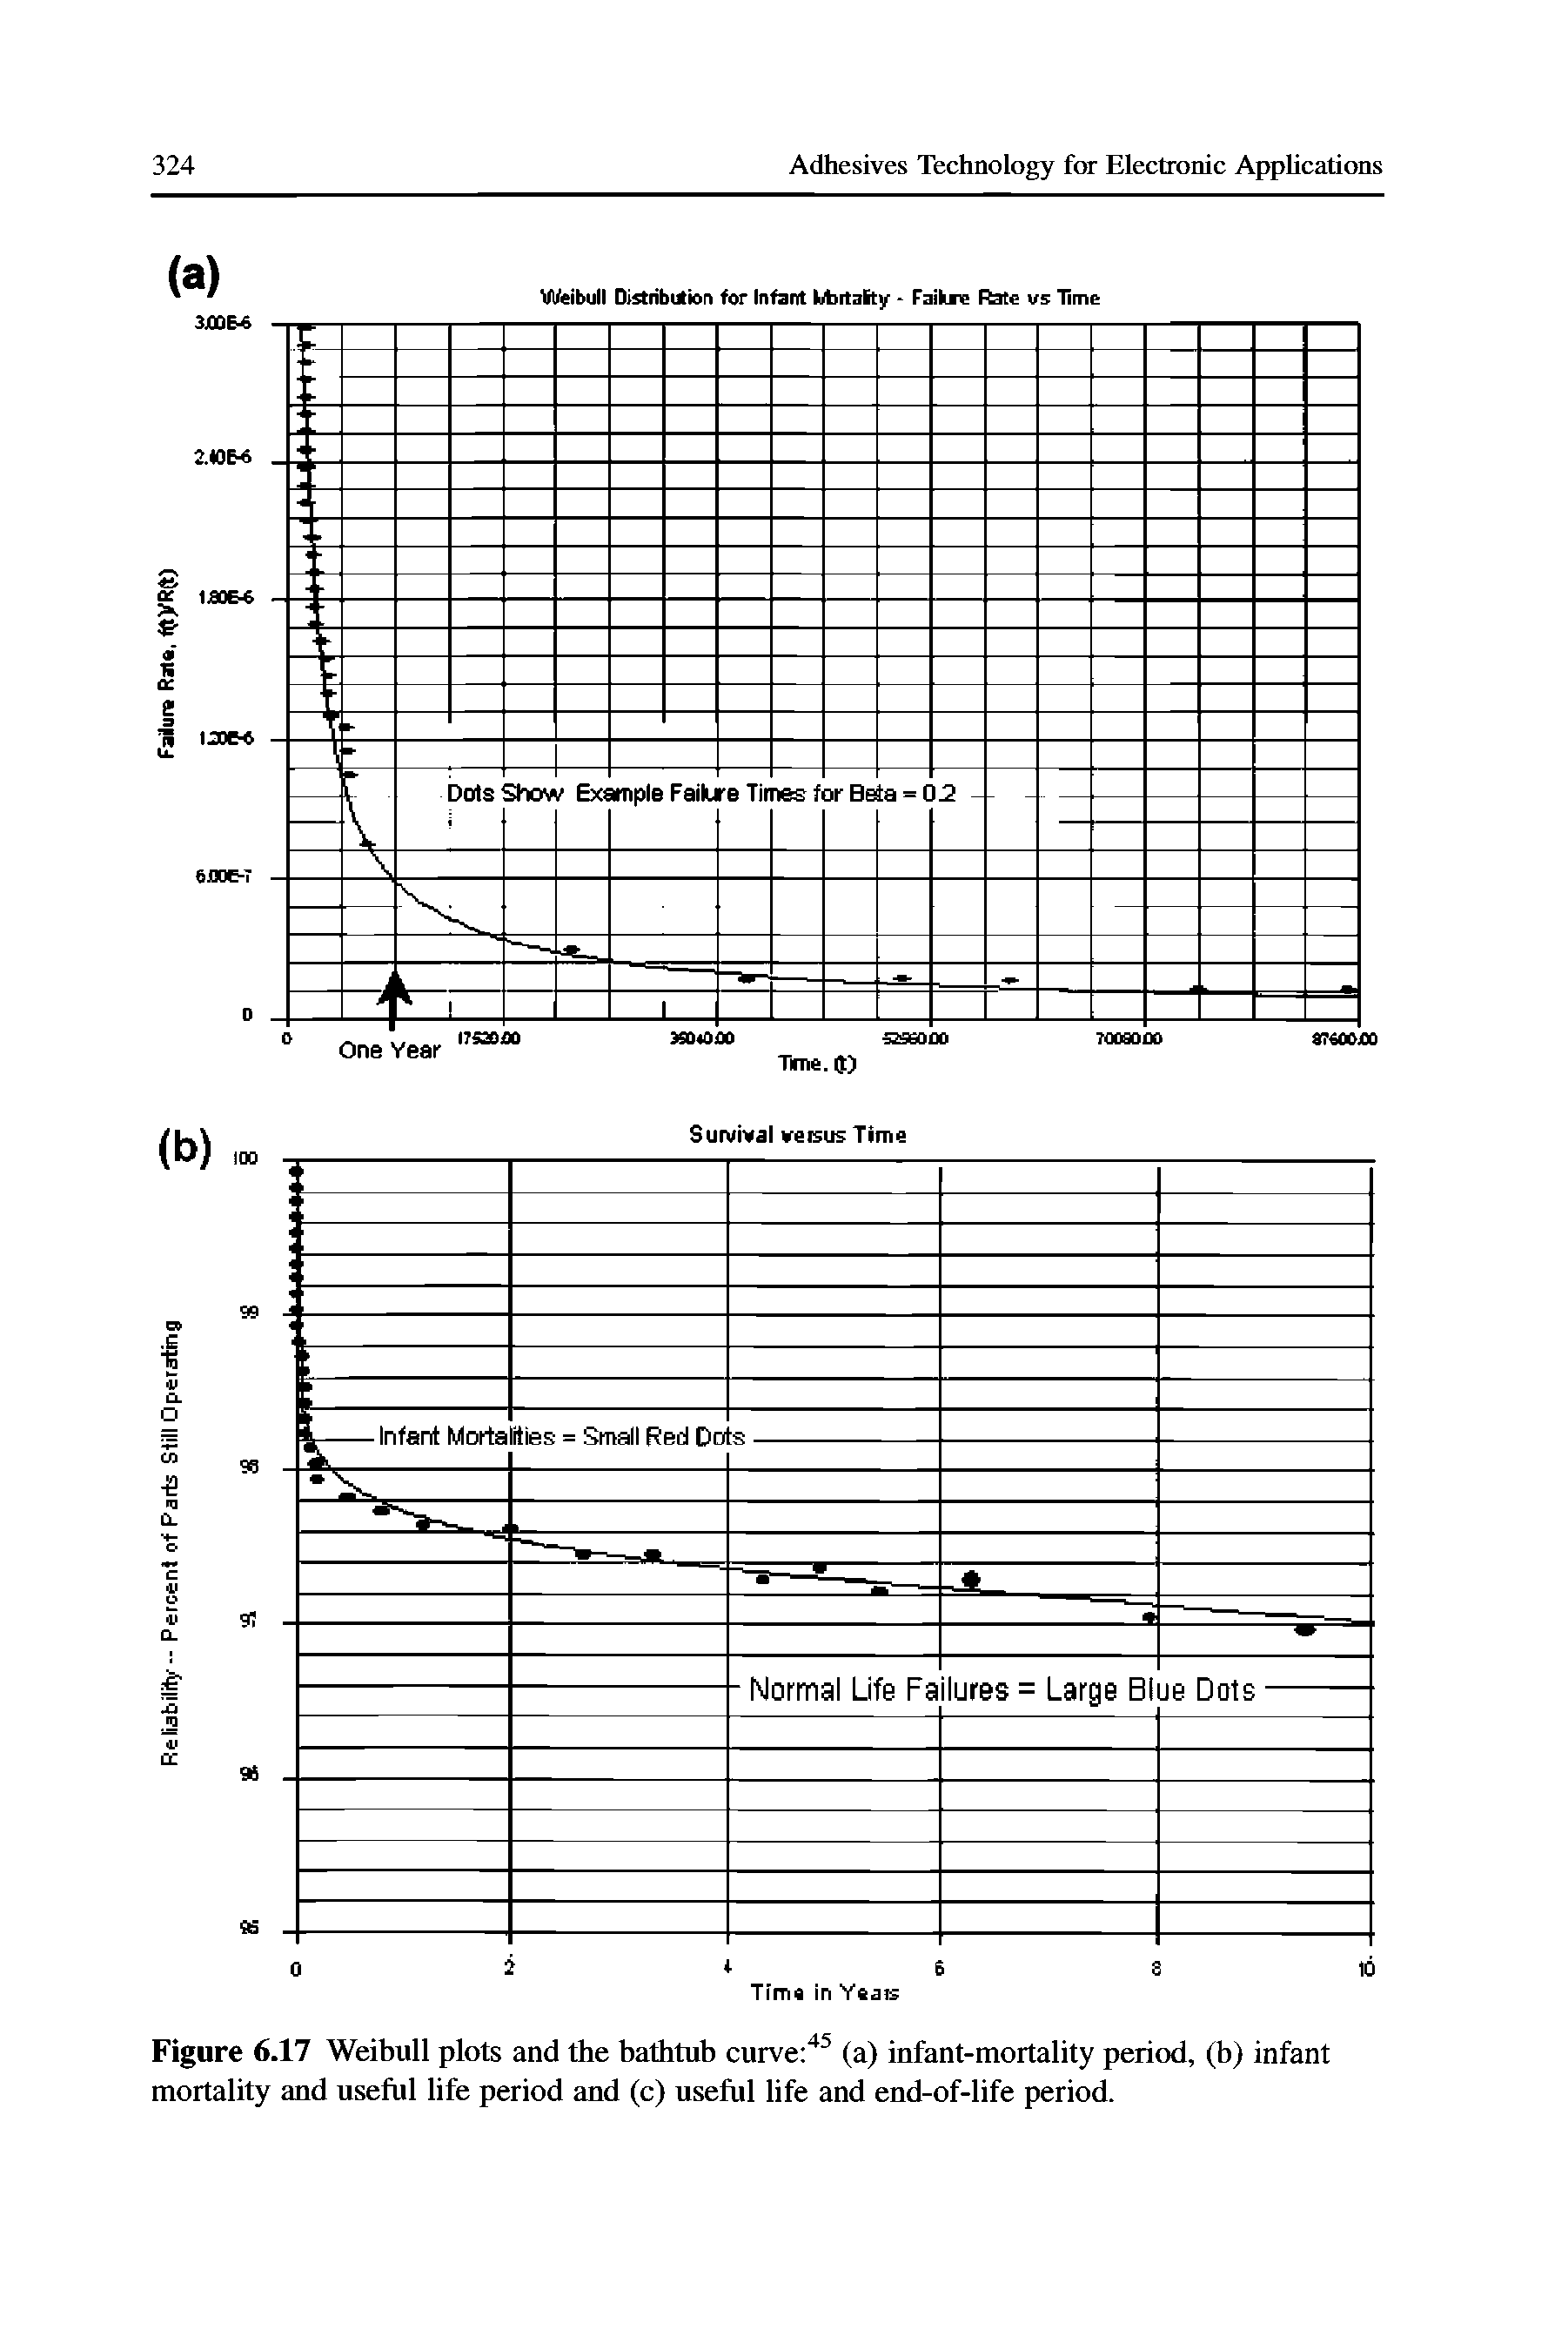 Figure 6.17 Weibull plots and the bathtub curve (a) infant-mortality period, (b) infant mortality and useful life period and (c) useful life and end-of-life period.